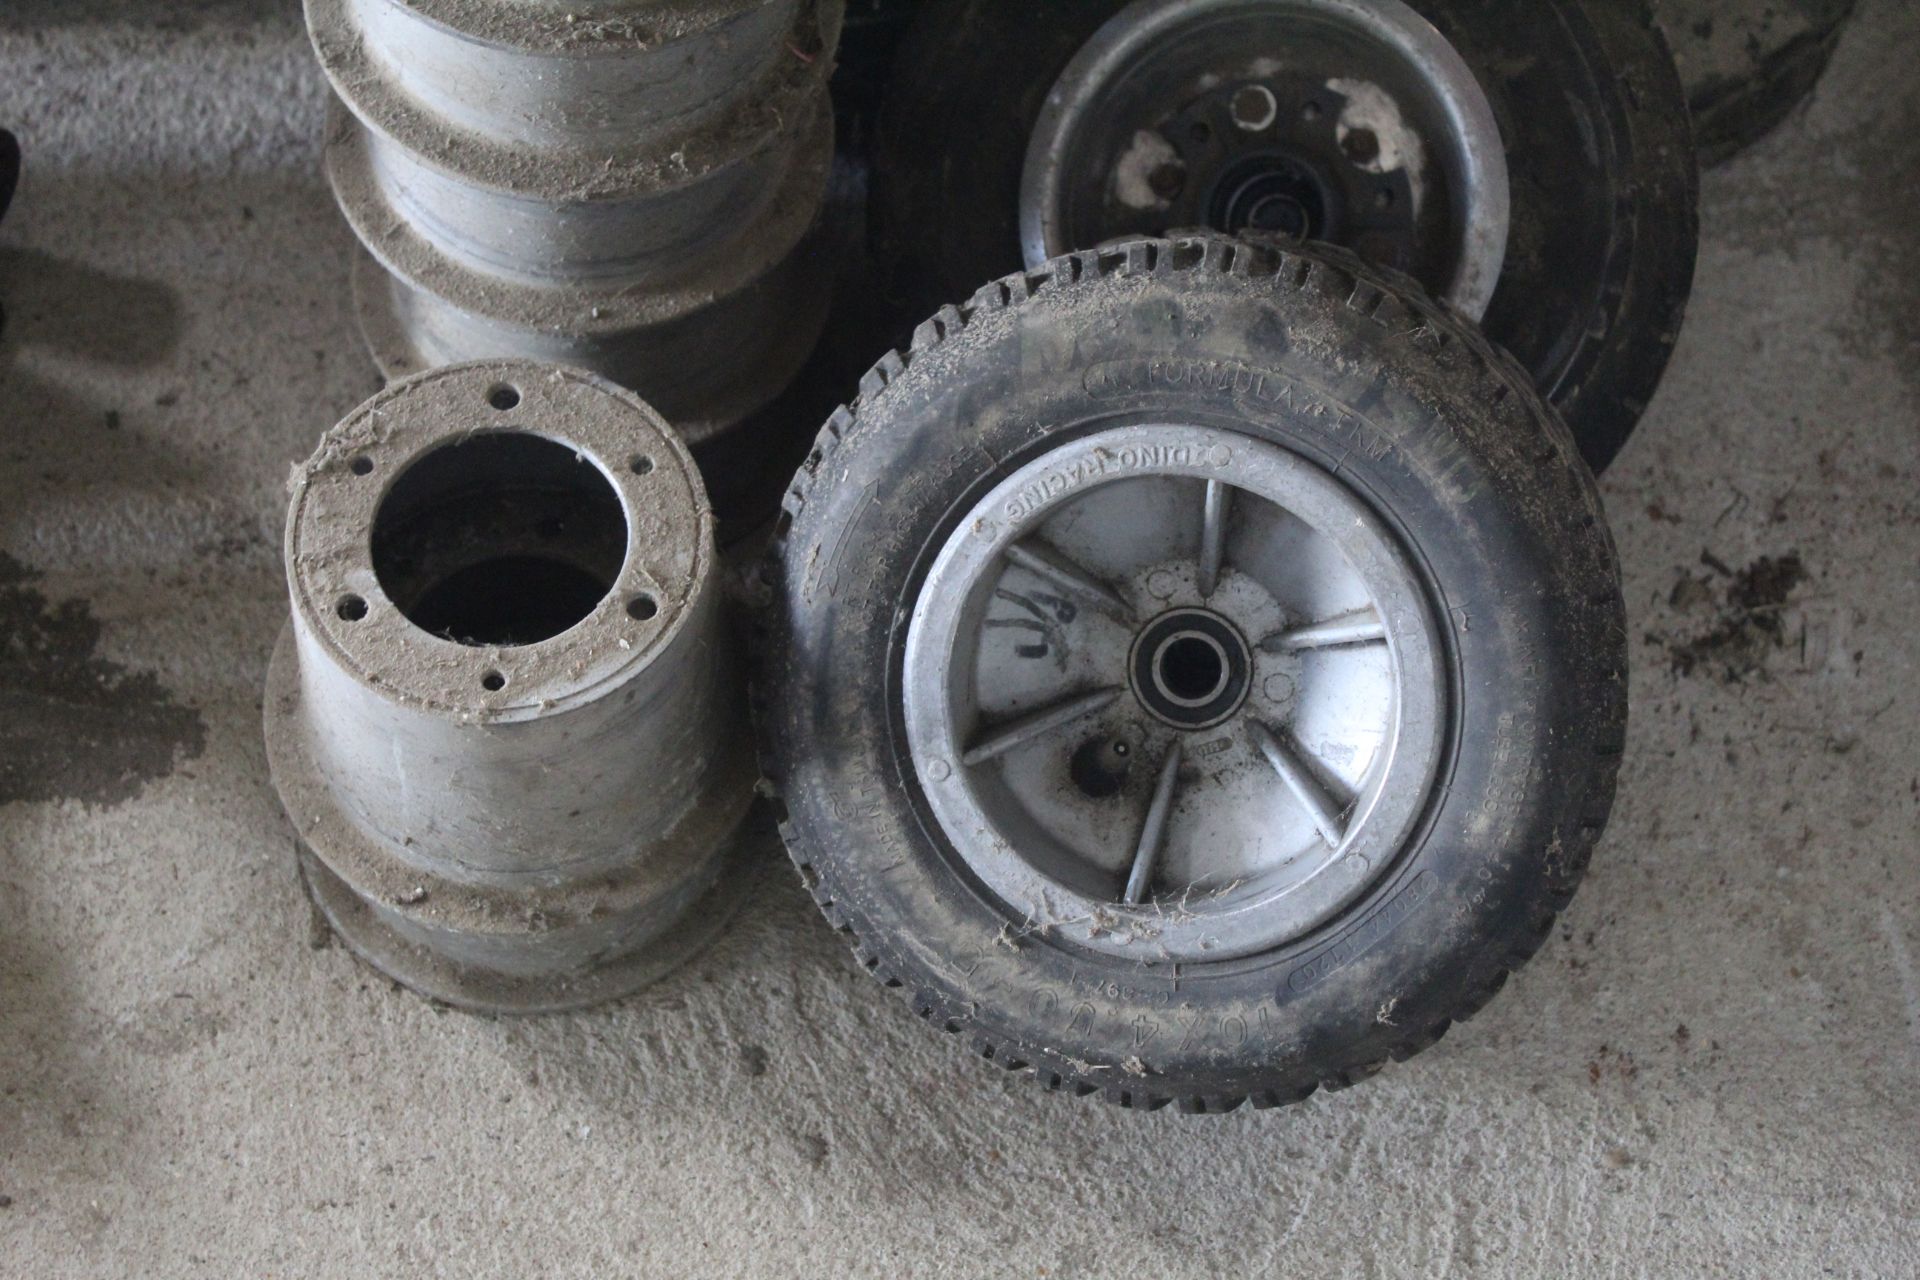 Go-cart wheels and hubs - Image 2 of 4